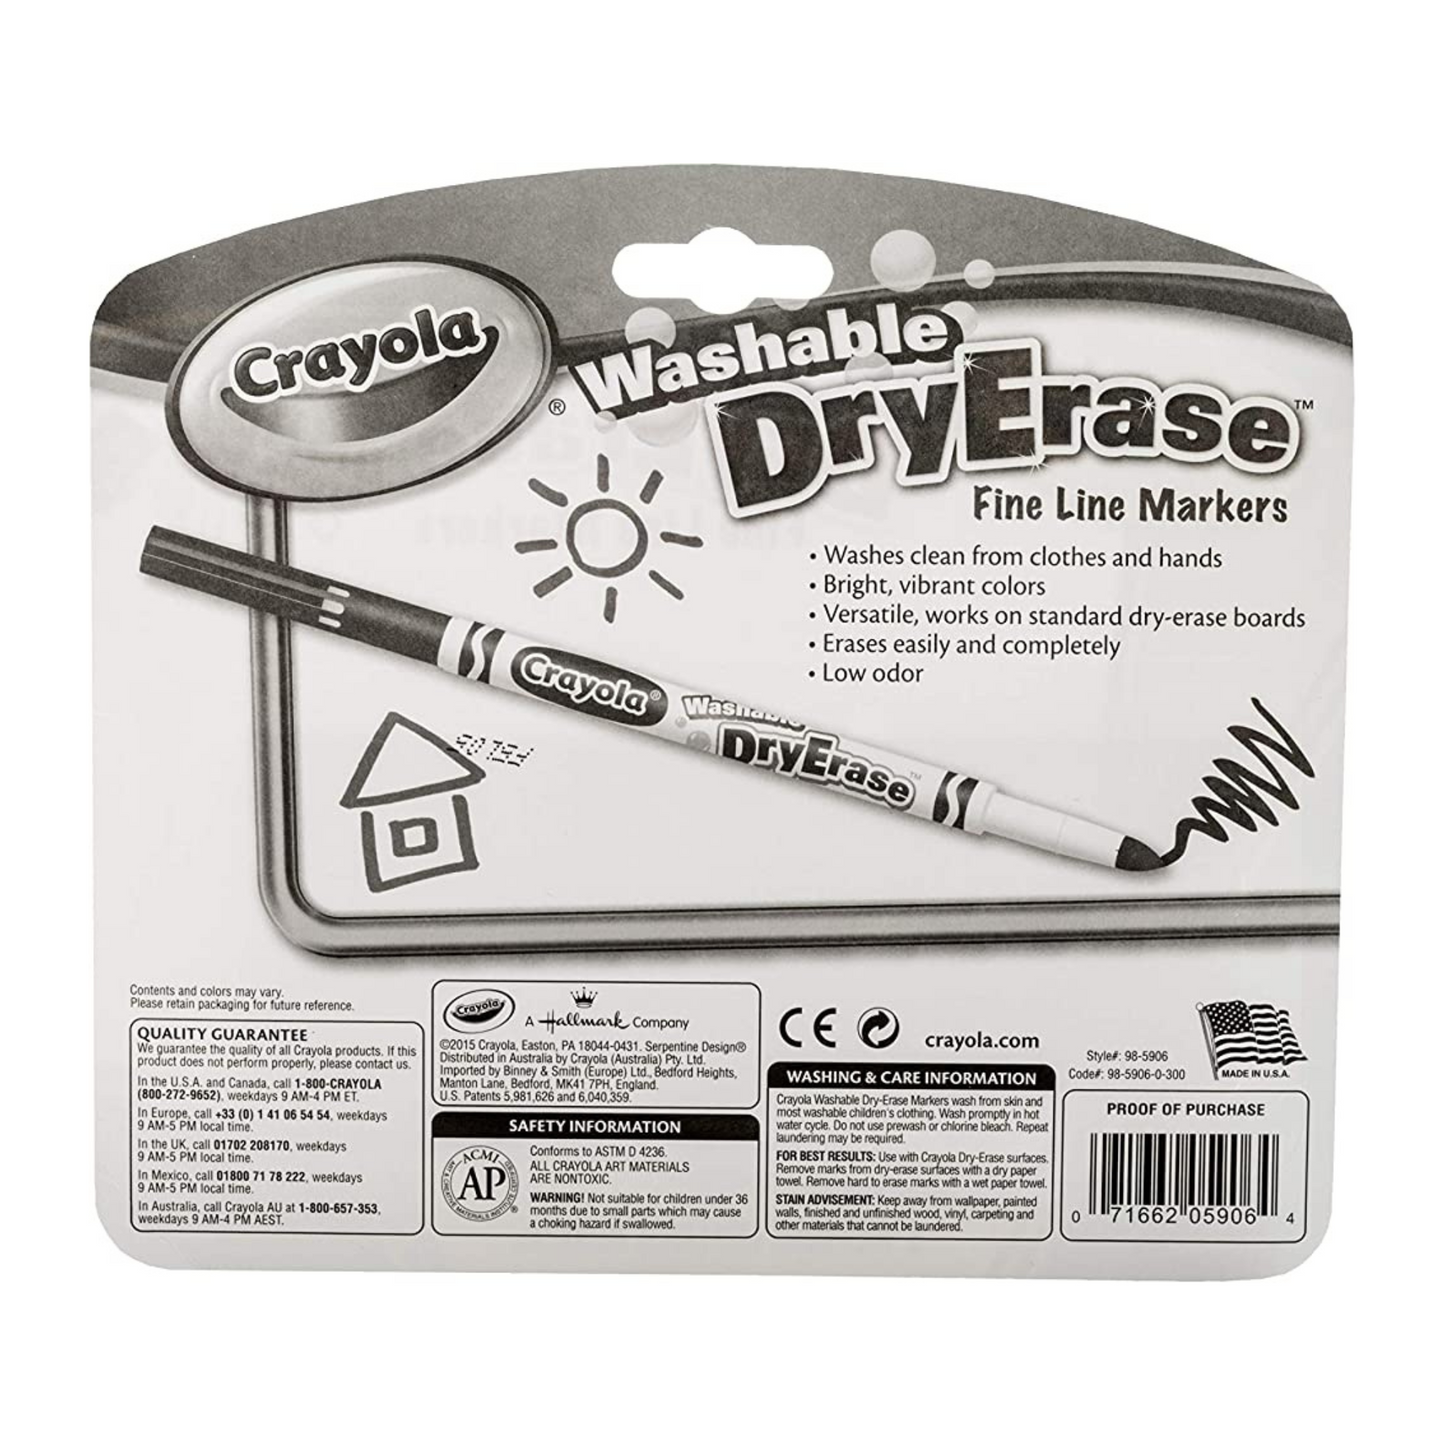 Buy Crayola® Take Note™ Dry Erase Markers, Black (Pack of 12) at S&S  Worldwide